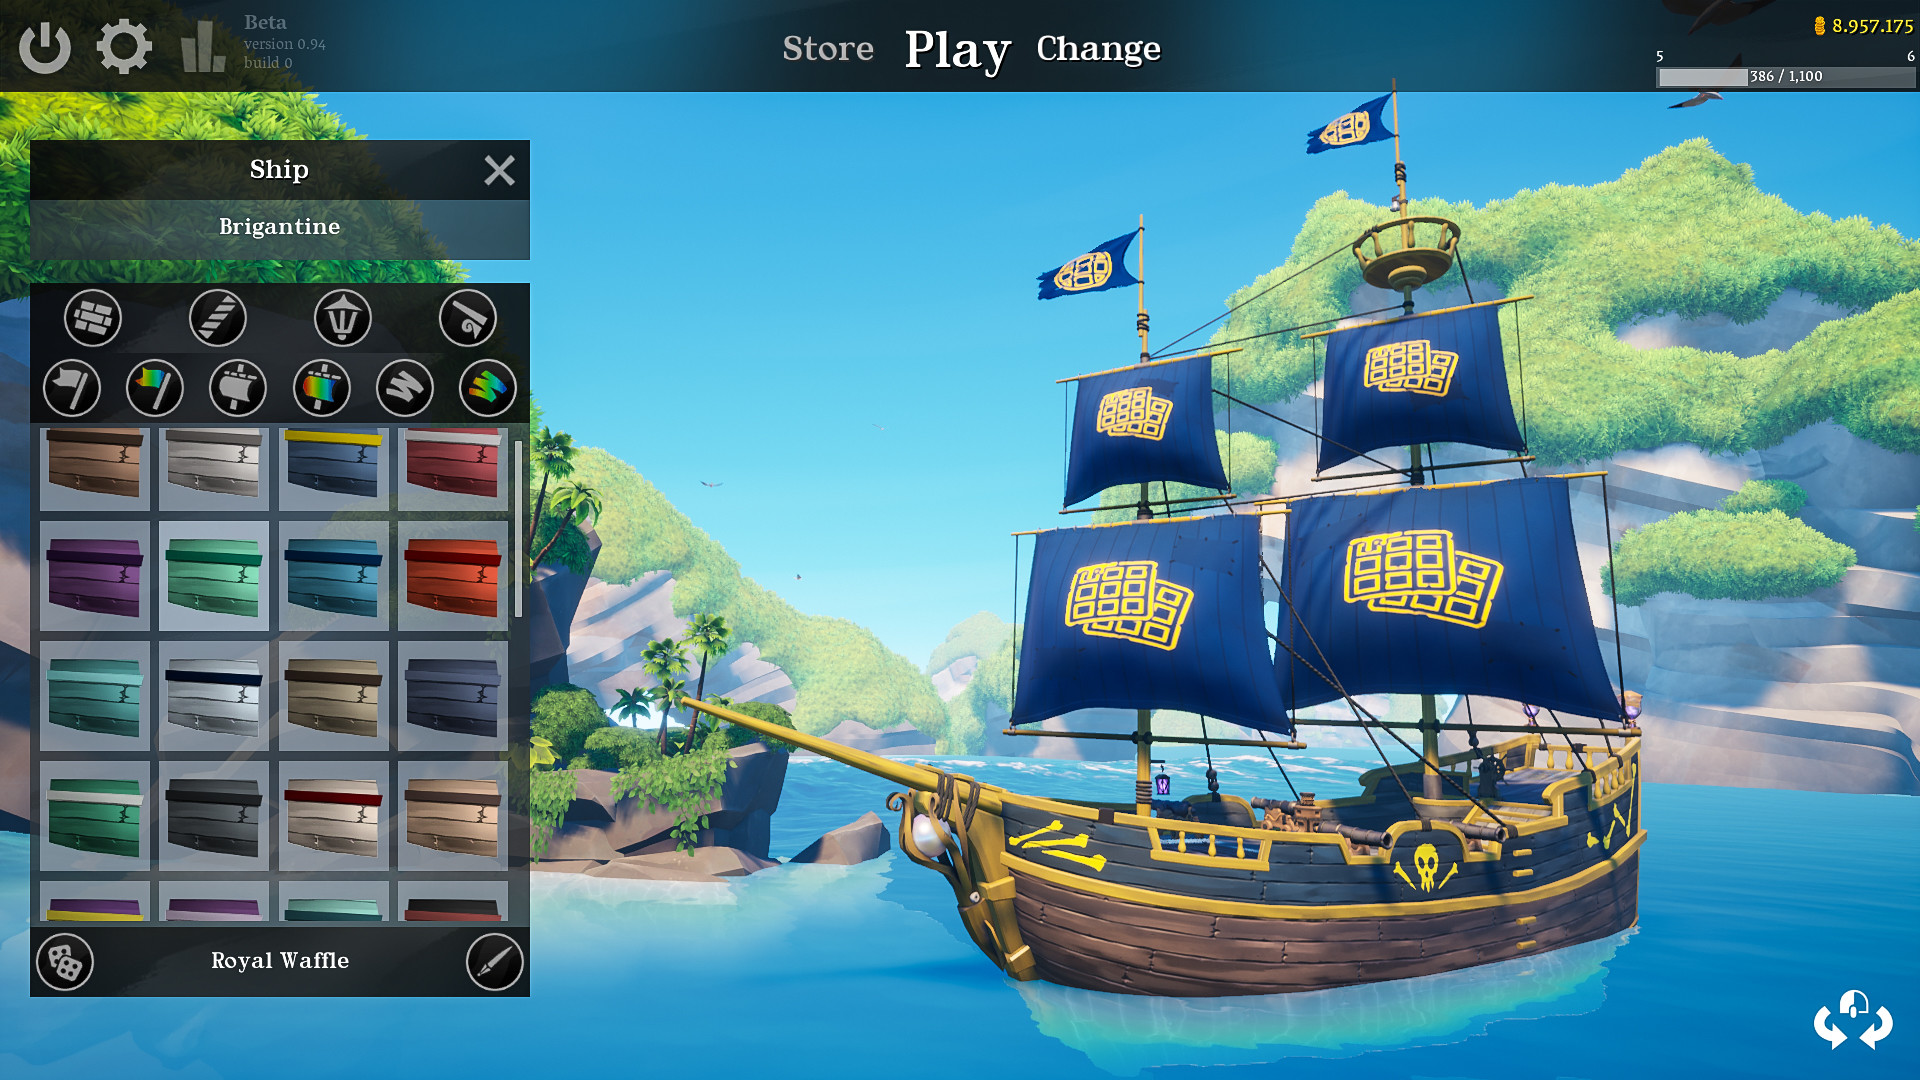 Blazing Sails Pirate Battle Royale On Steam - roblox pirate ship